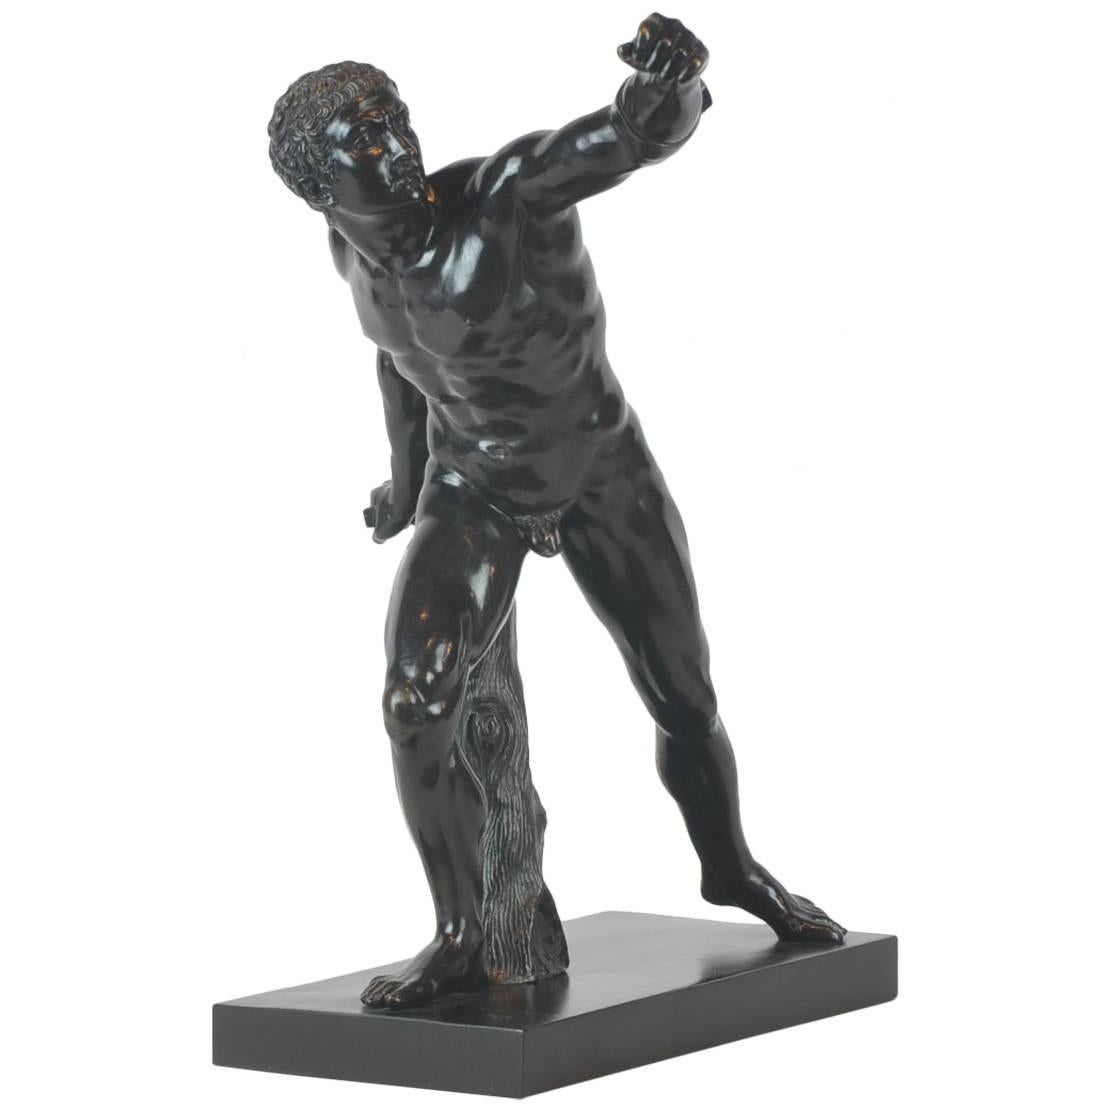 Italian 19th Century Grand Tour Bronze of a Gladiator Cast by Sommer in Napoli